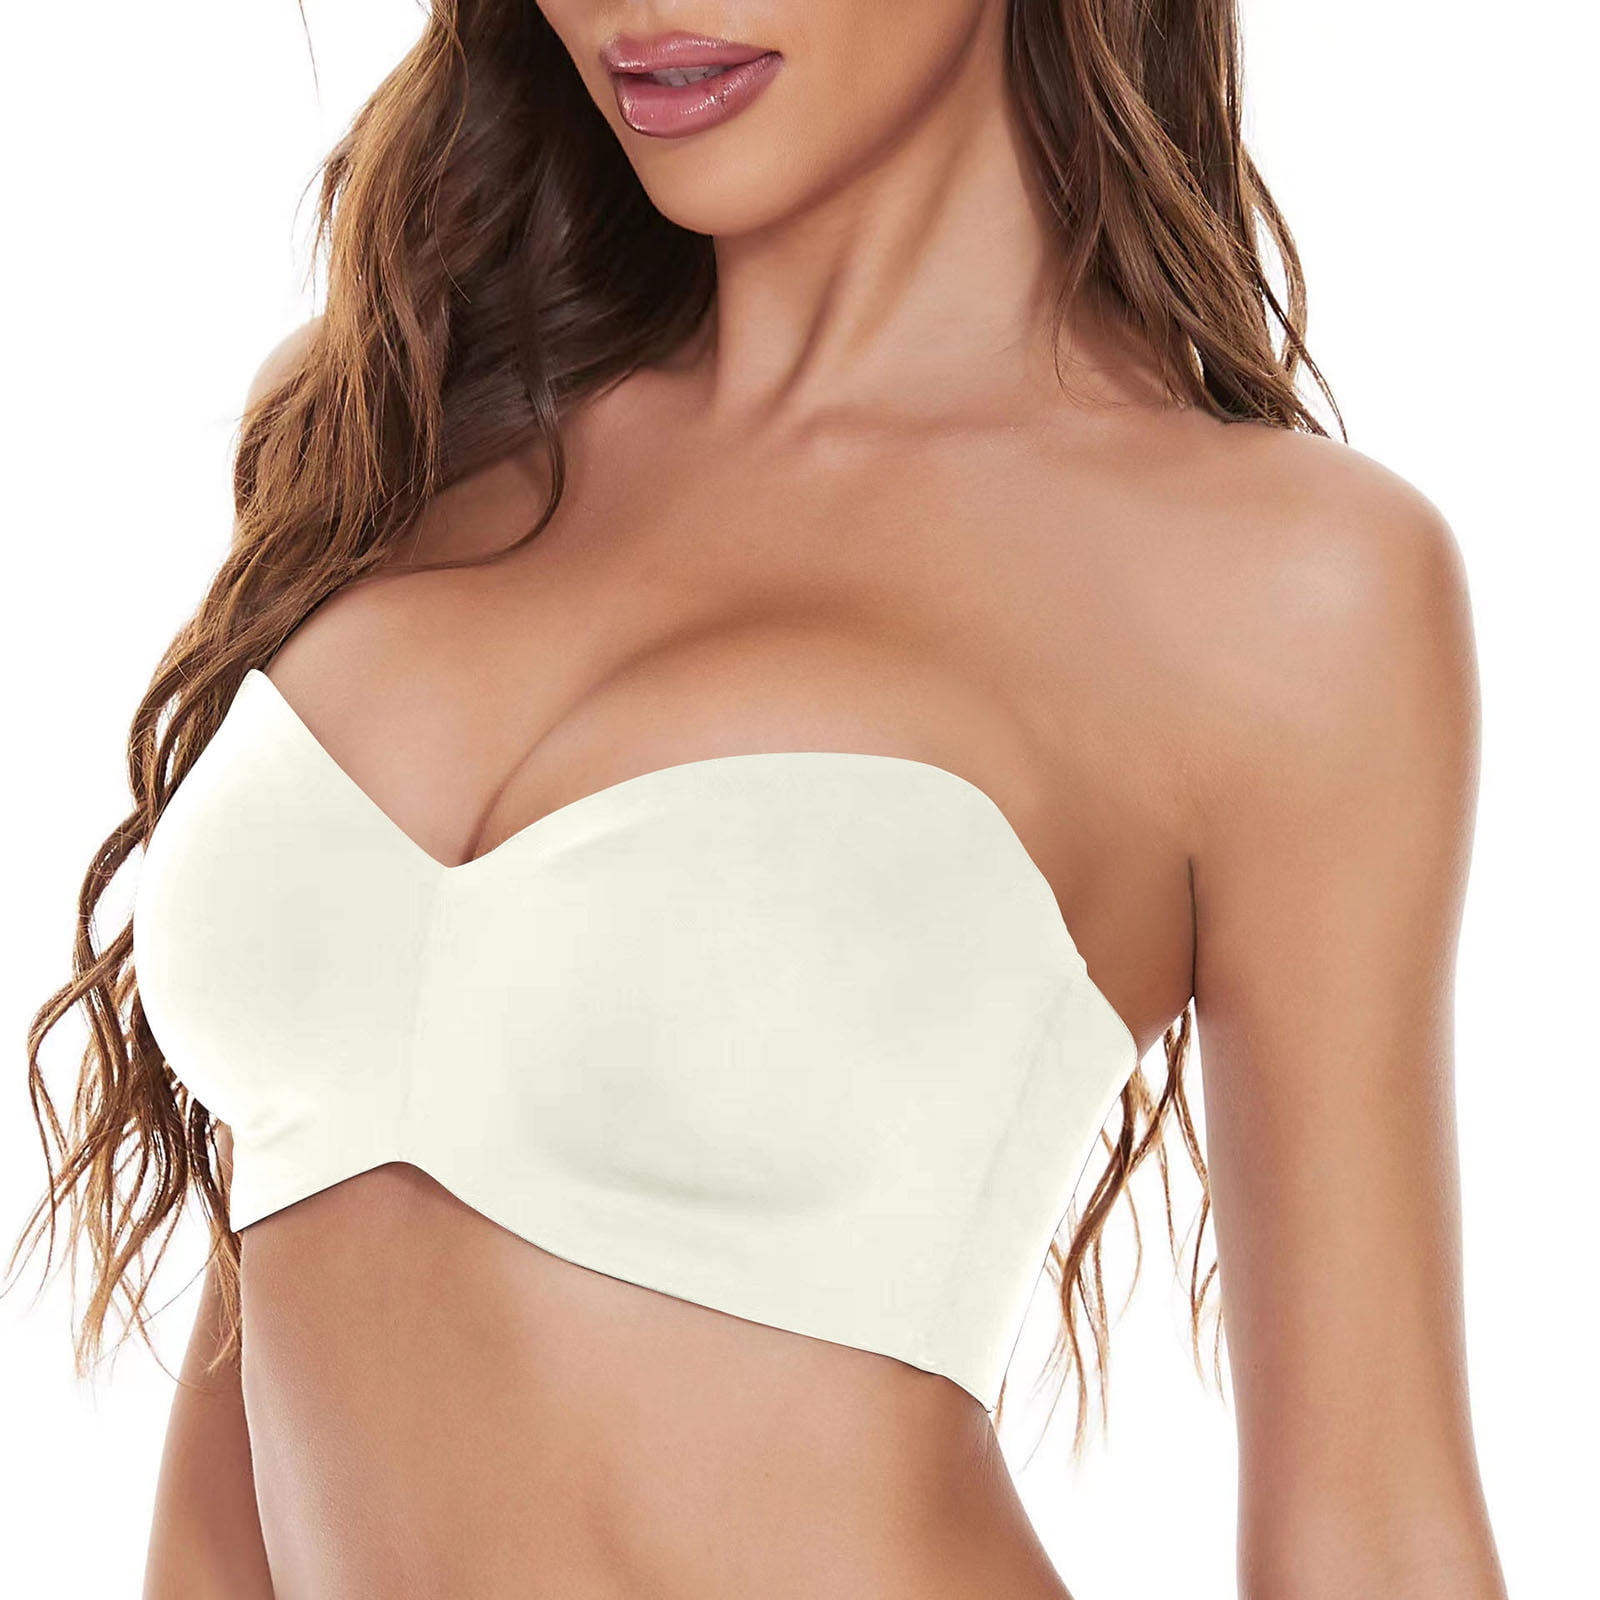 Strapless Bra Tube Top Best Bra for Sagging Breasts and Back Fat